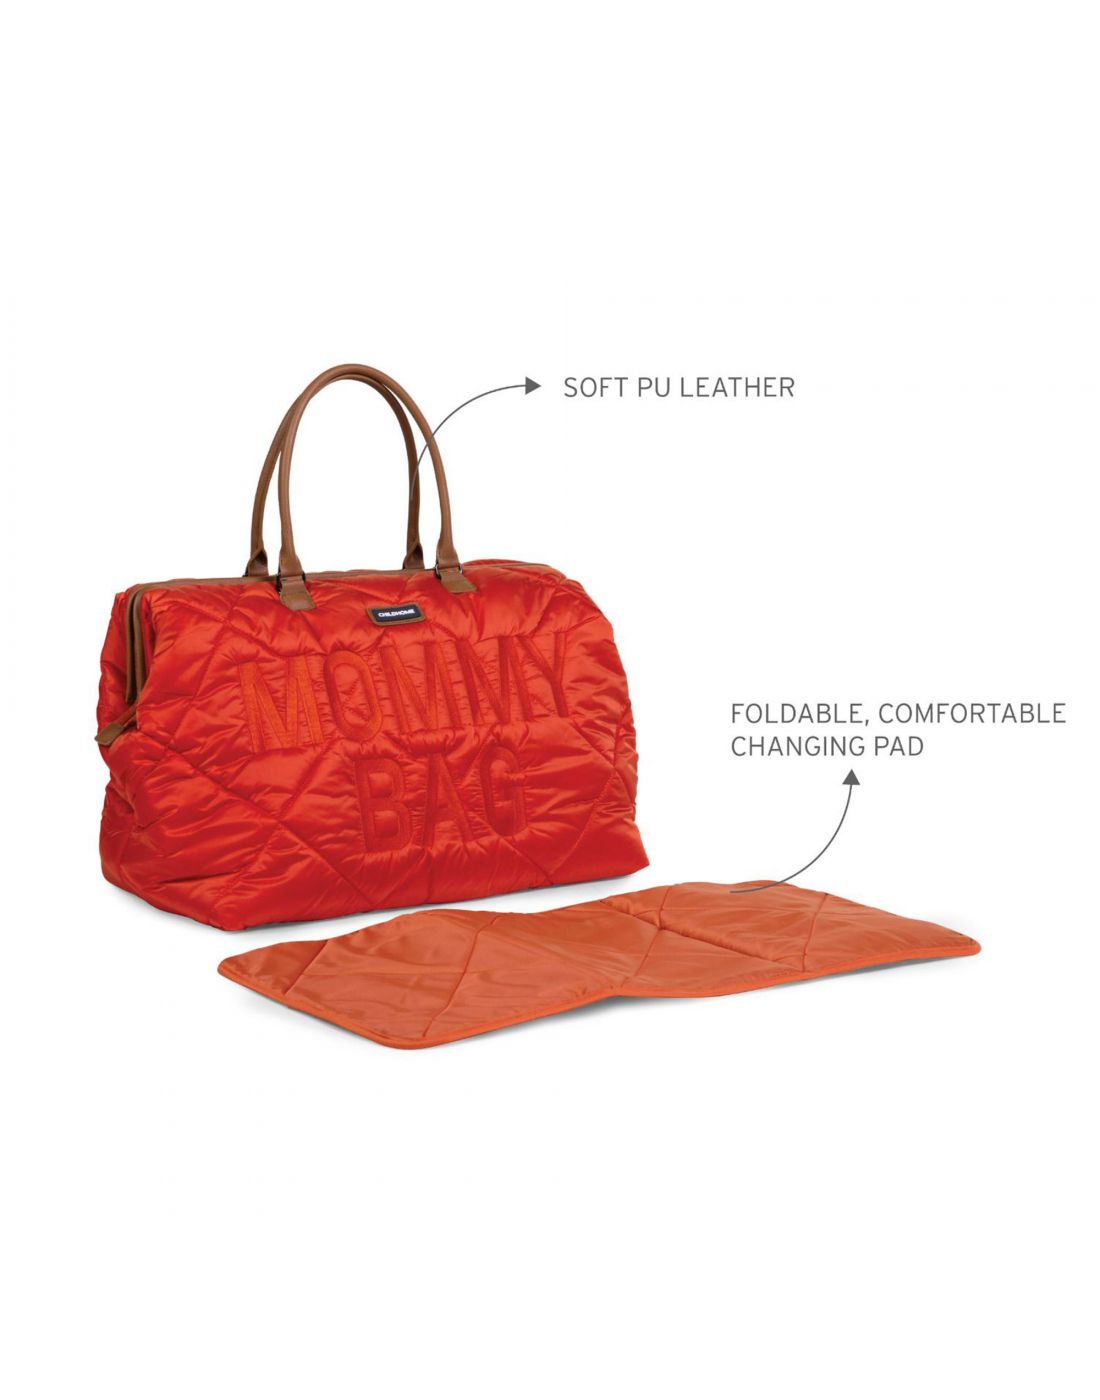 Childhome Mommy Bag Puffered Red